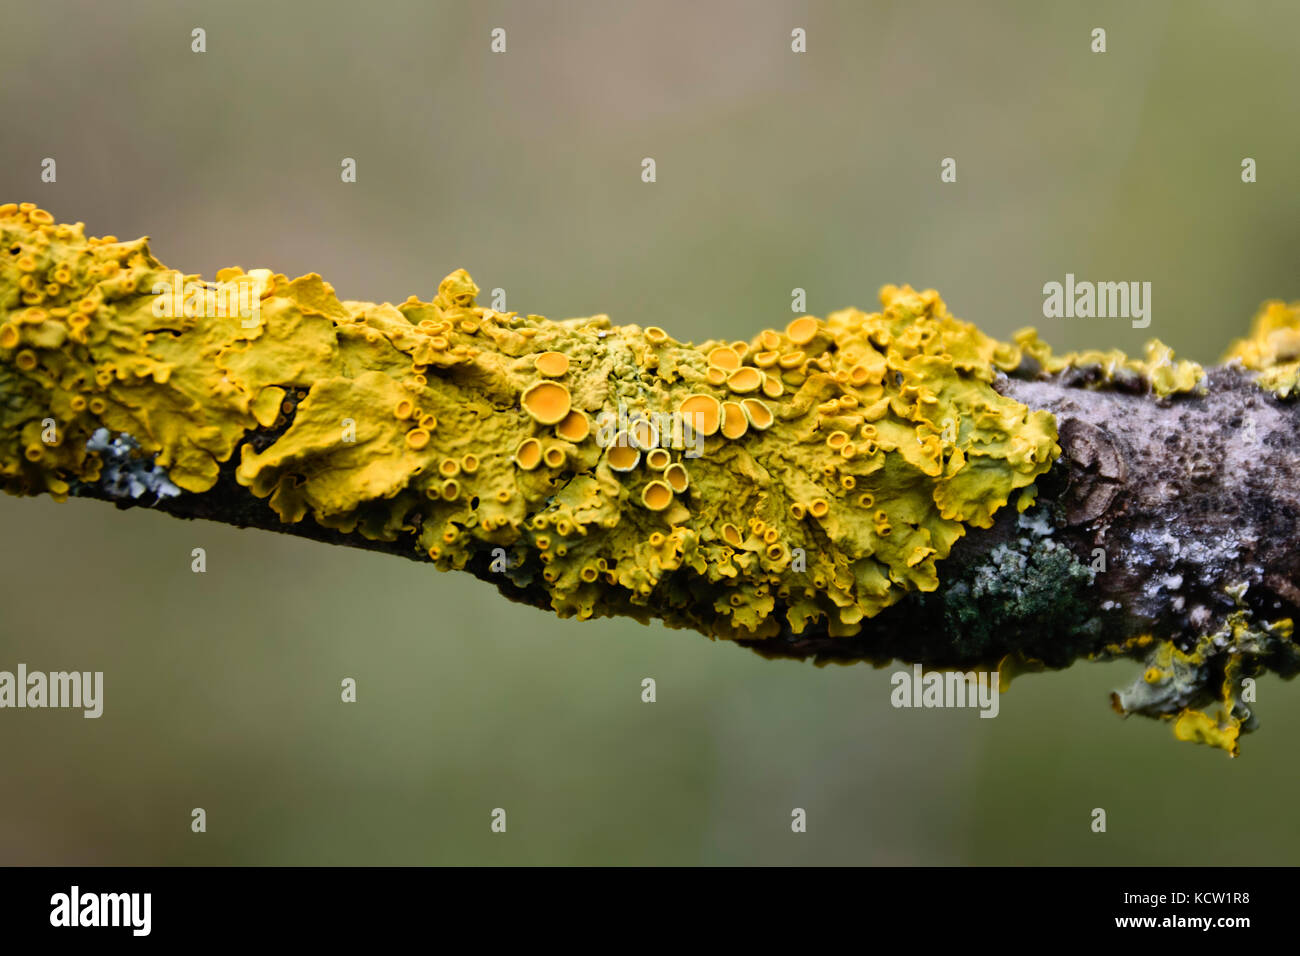 Extreme Close-up of Yellow Xanthoria Parietina Lichen Growing on Branch Stock Photo